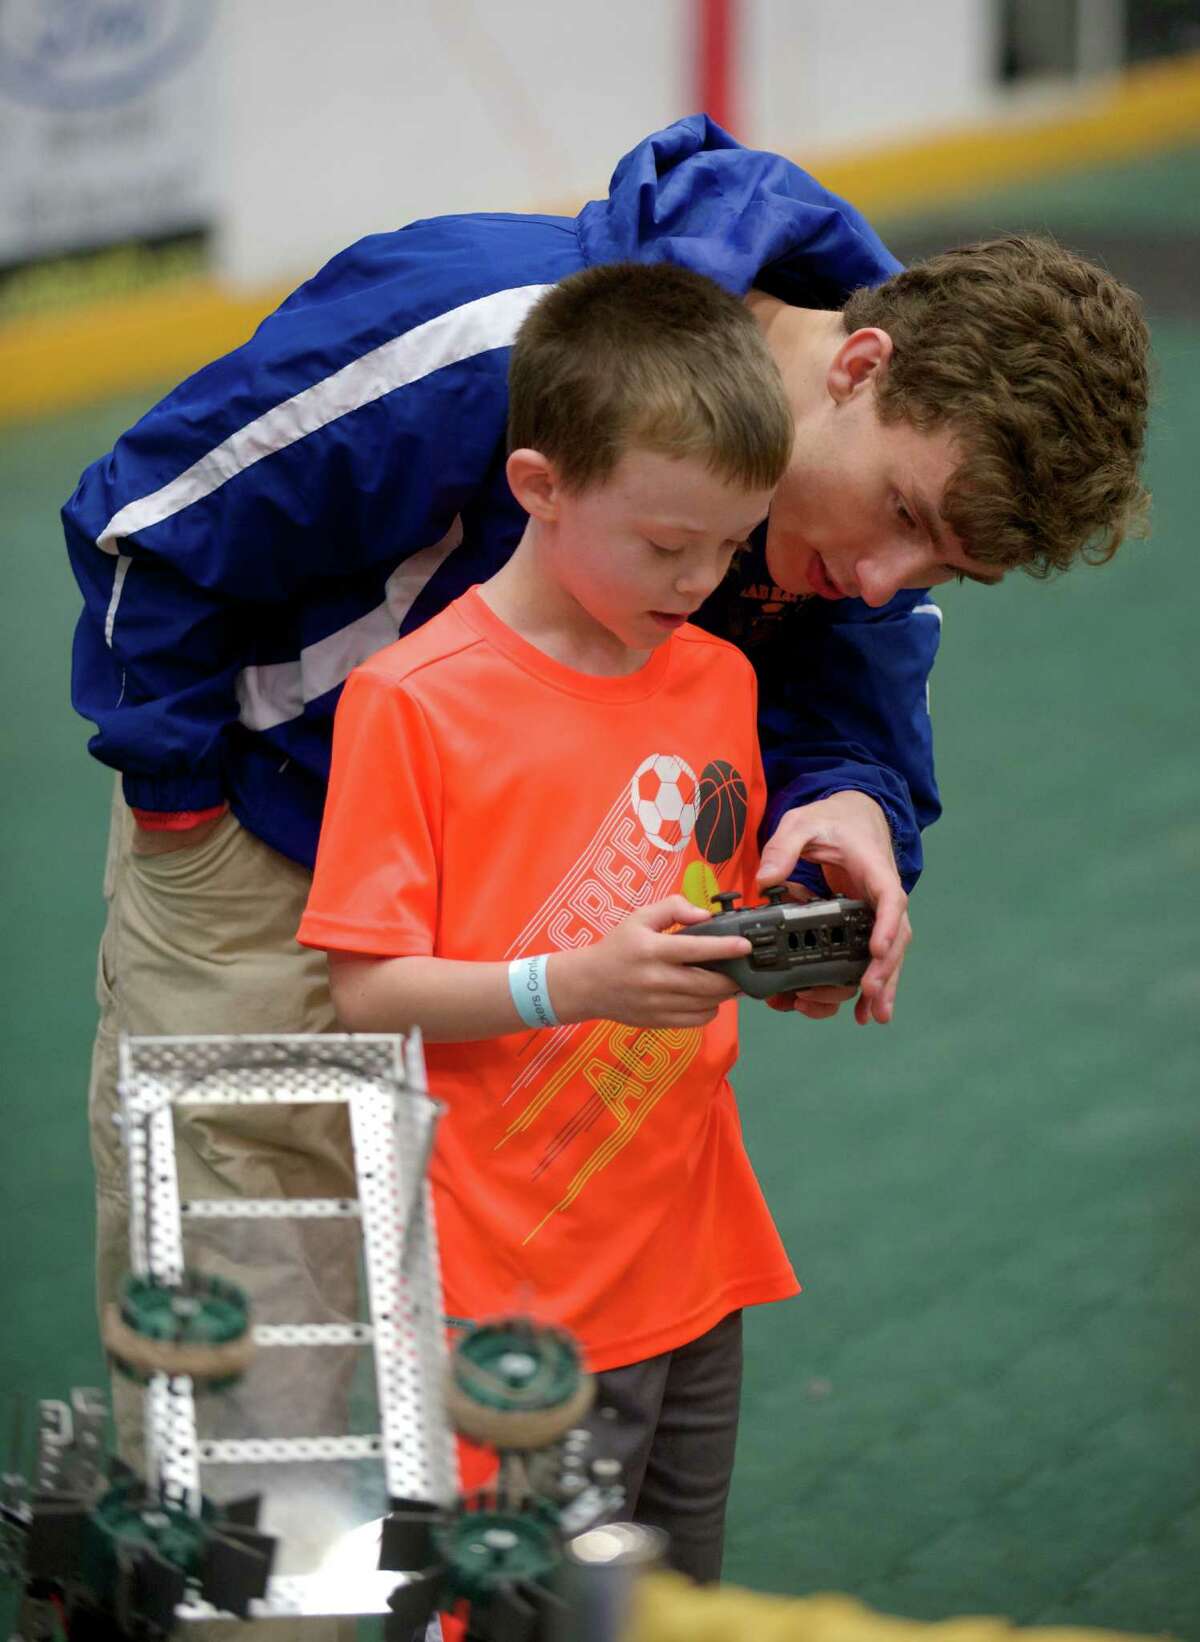 Ben Albano, 17, from Danbury, right, shows Tyler Marshall, 6, of New Fairfield, how to control a robot on display by Team 5150 Mad Hatters, a robotics team from Danbury High School during the 2014 Mad Hackers event, "A Day of Innovation, Technology & Social Media", which took place in Danbury, Conn, on Saturday, June 6, 2014.